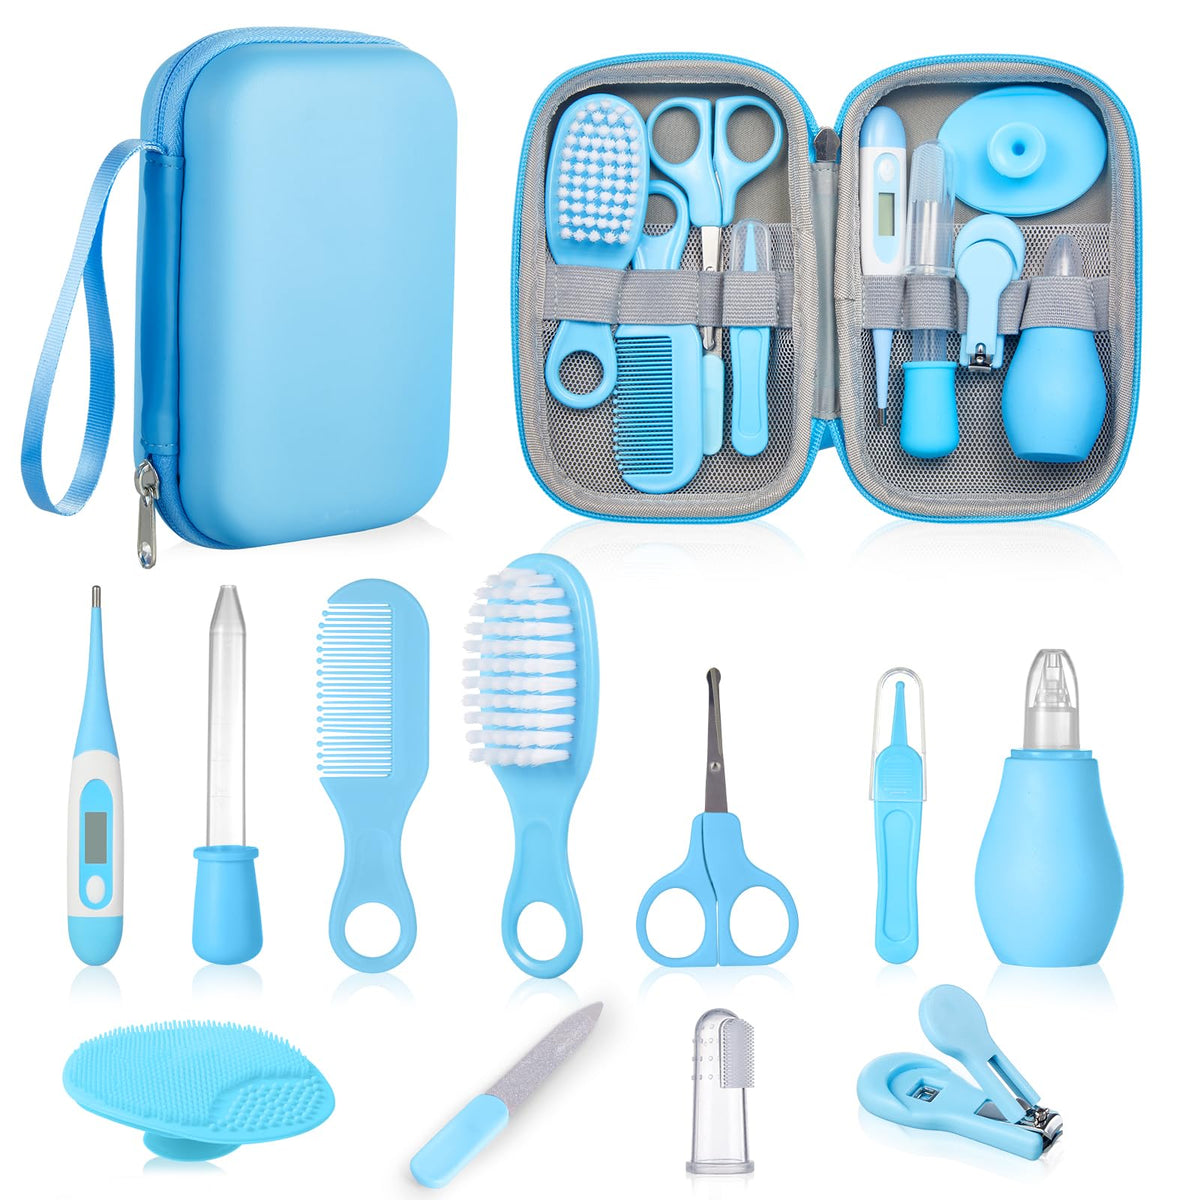 Baby Healthcare and Grooming Kit, Lictin 12PCS Nursery Care Kit, Newborn Safety Health Care Set with Hair Brush,Comb,Nail Clippers and More for Newborn Infant Toddlers Baby Boys